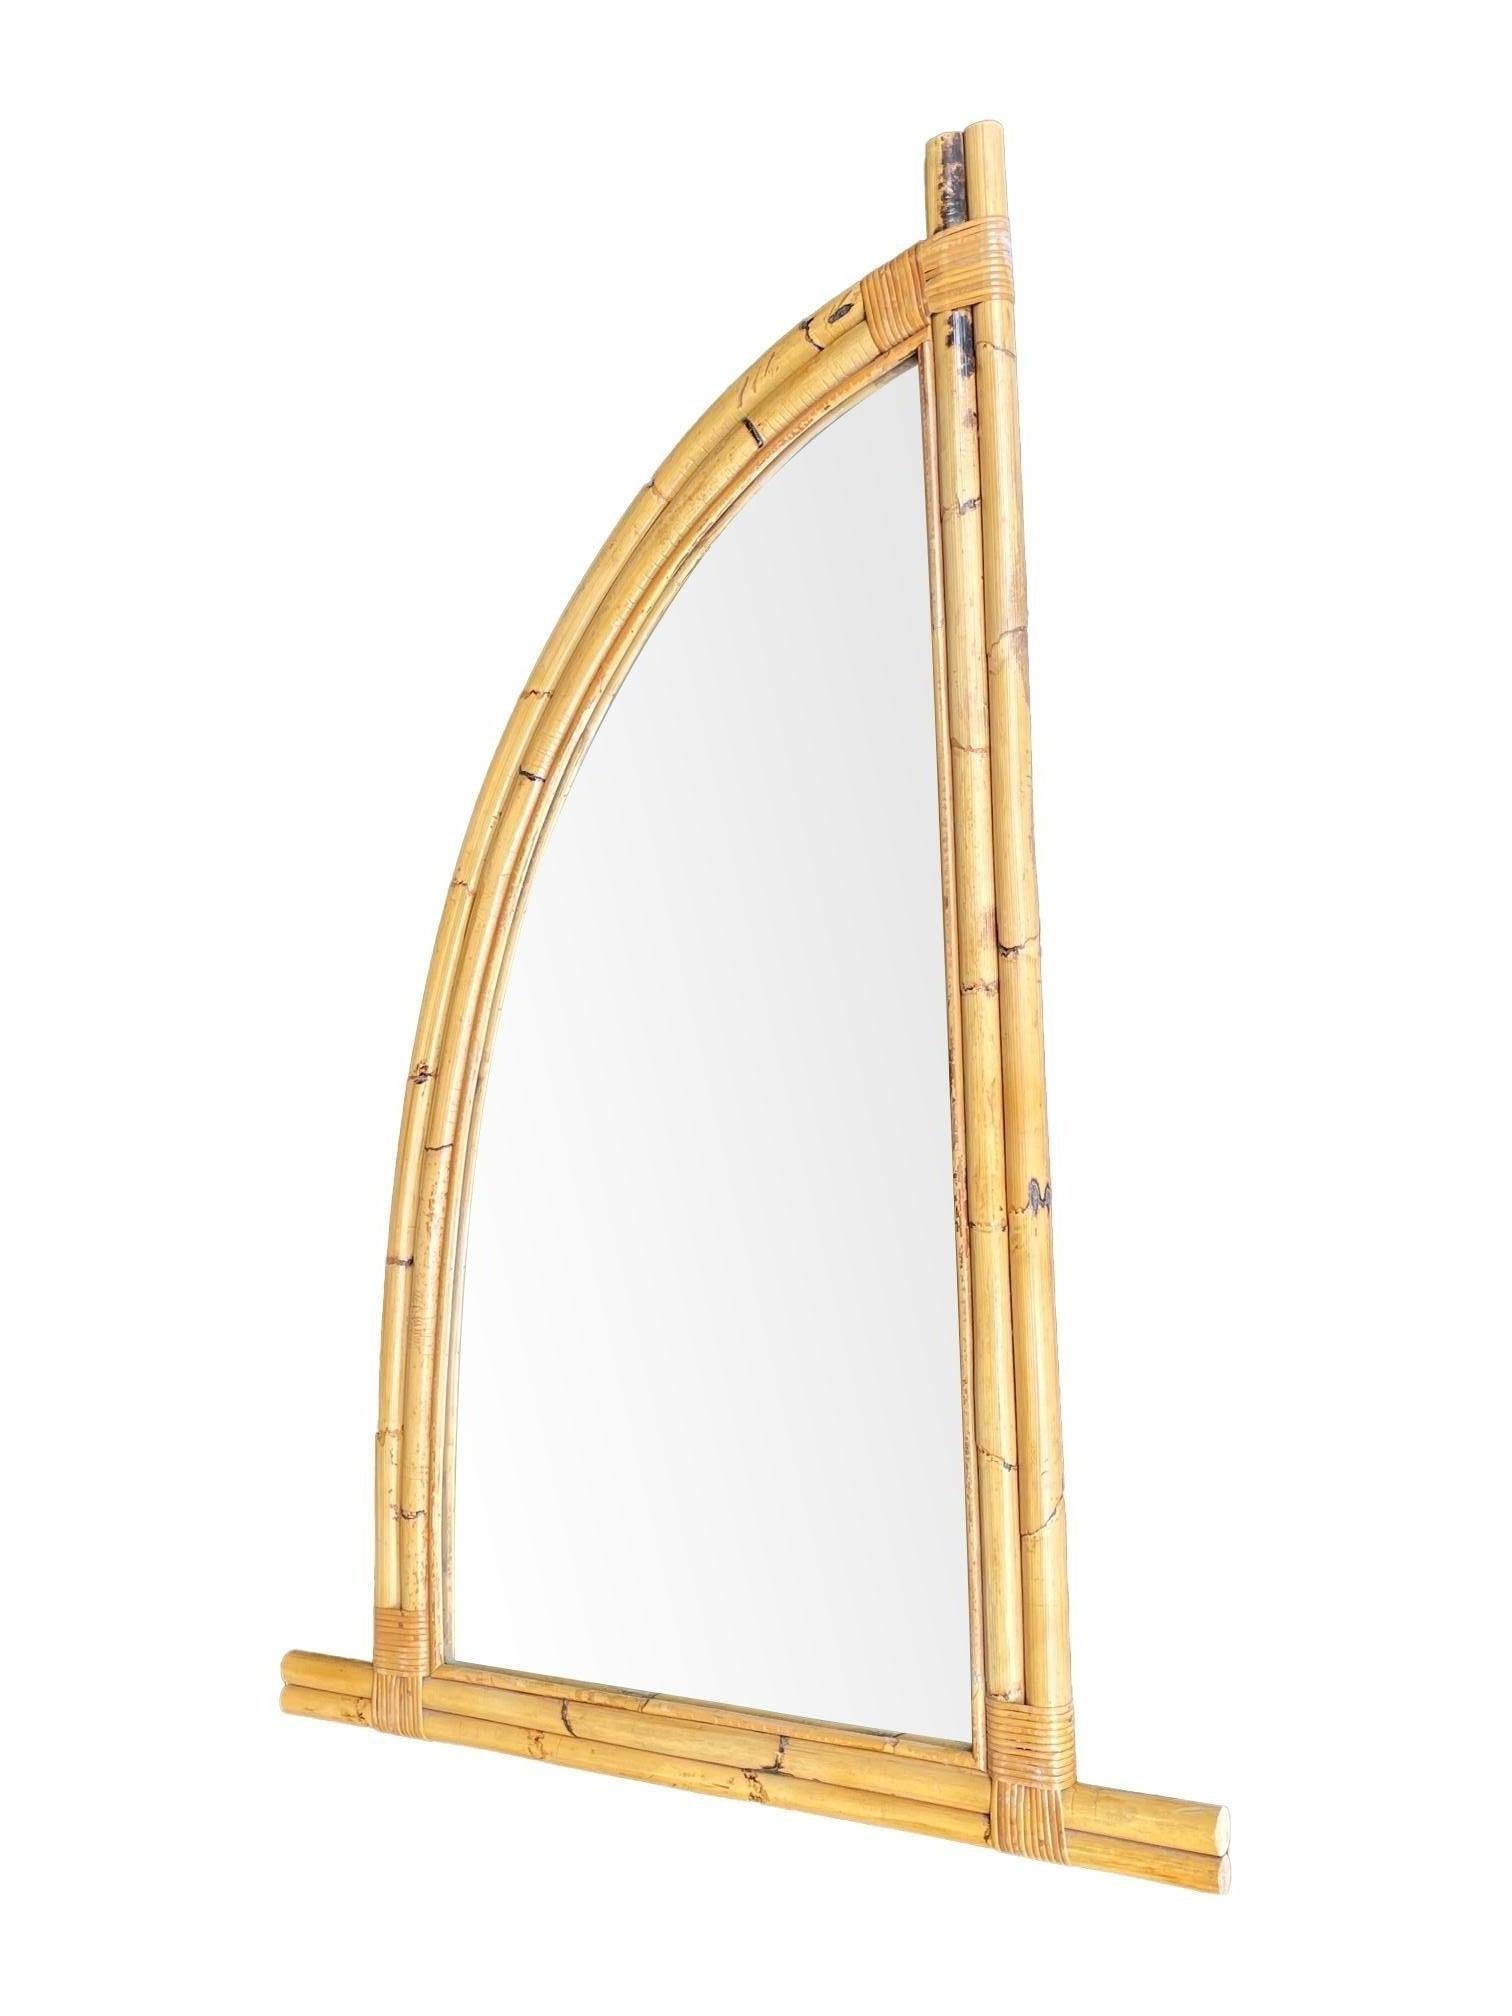 Pair of Interesting 1970s Italian Curved Bamboo Mirrors For Sale 1